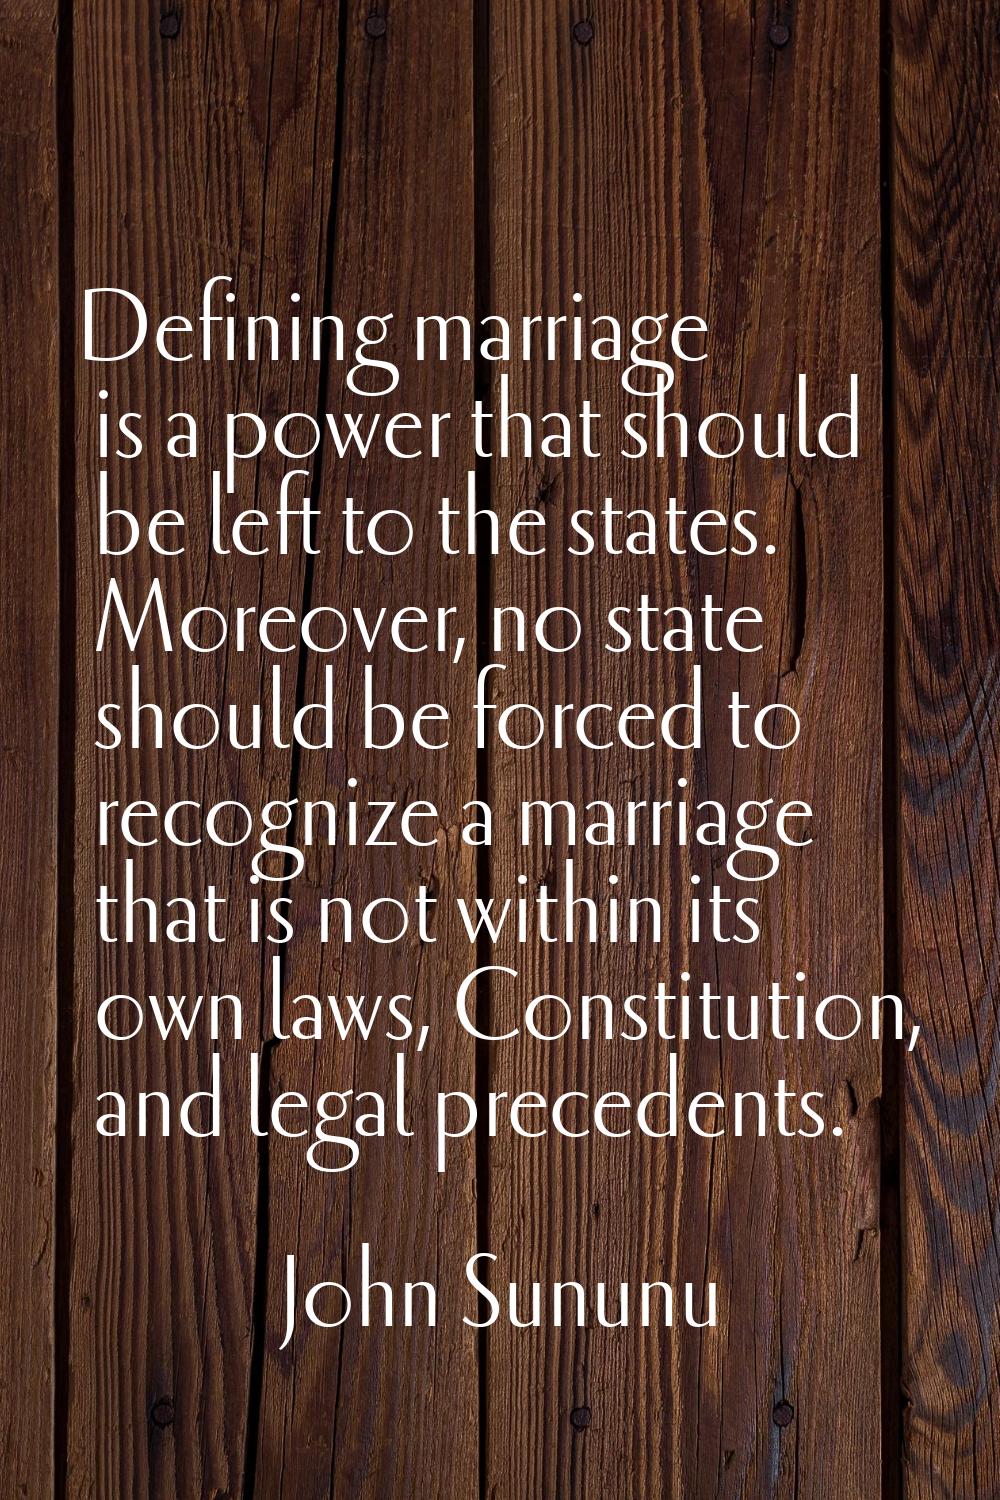 Defining marriage is a power that should be left to the states. Moreover, no state should be forced